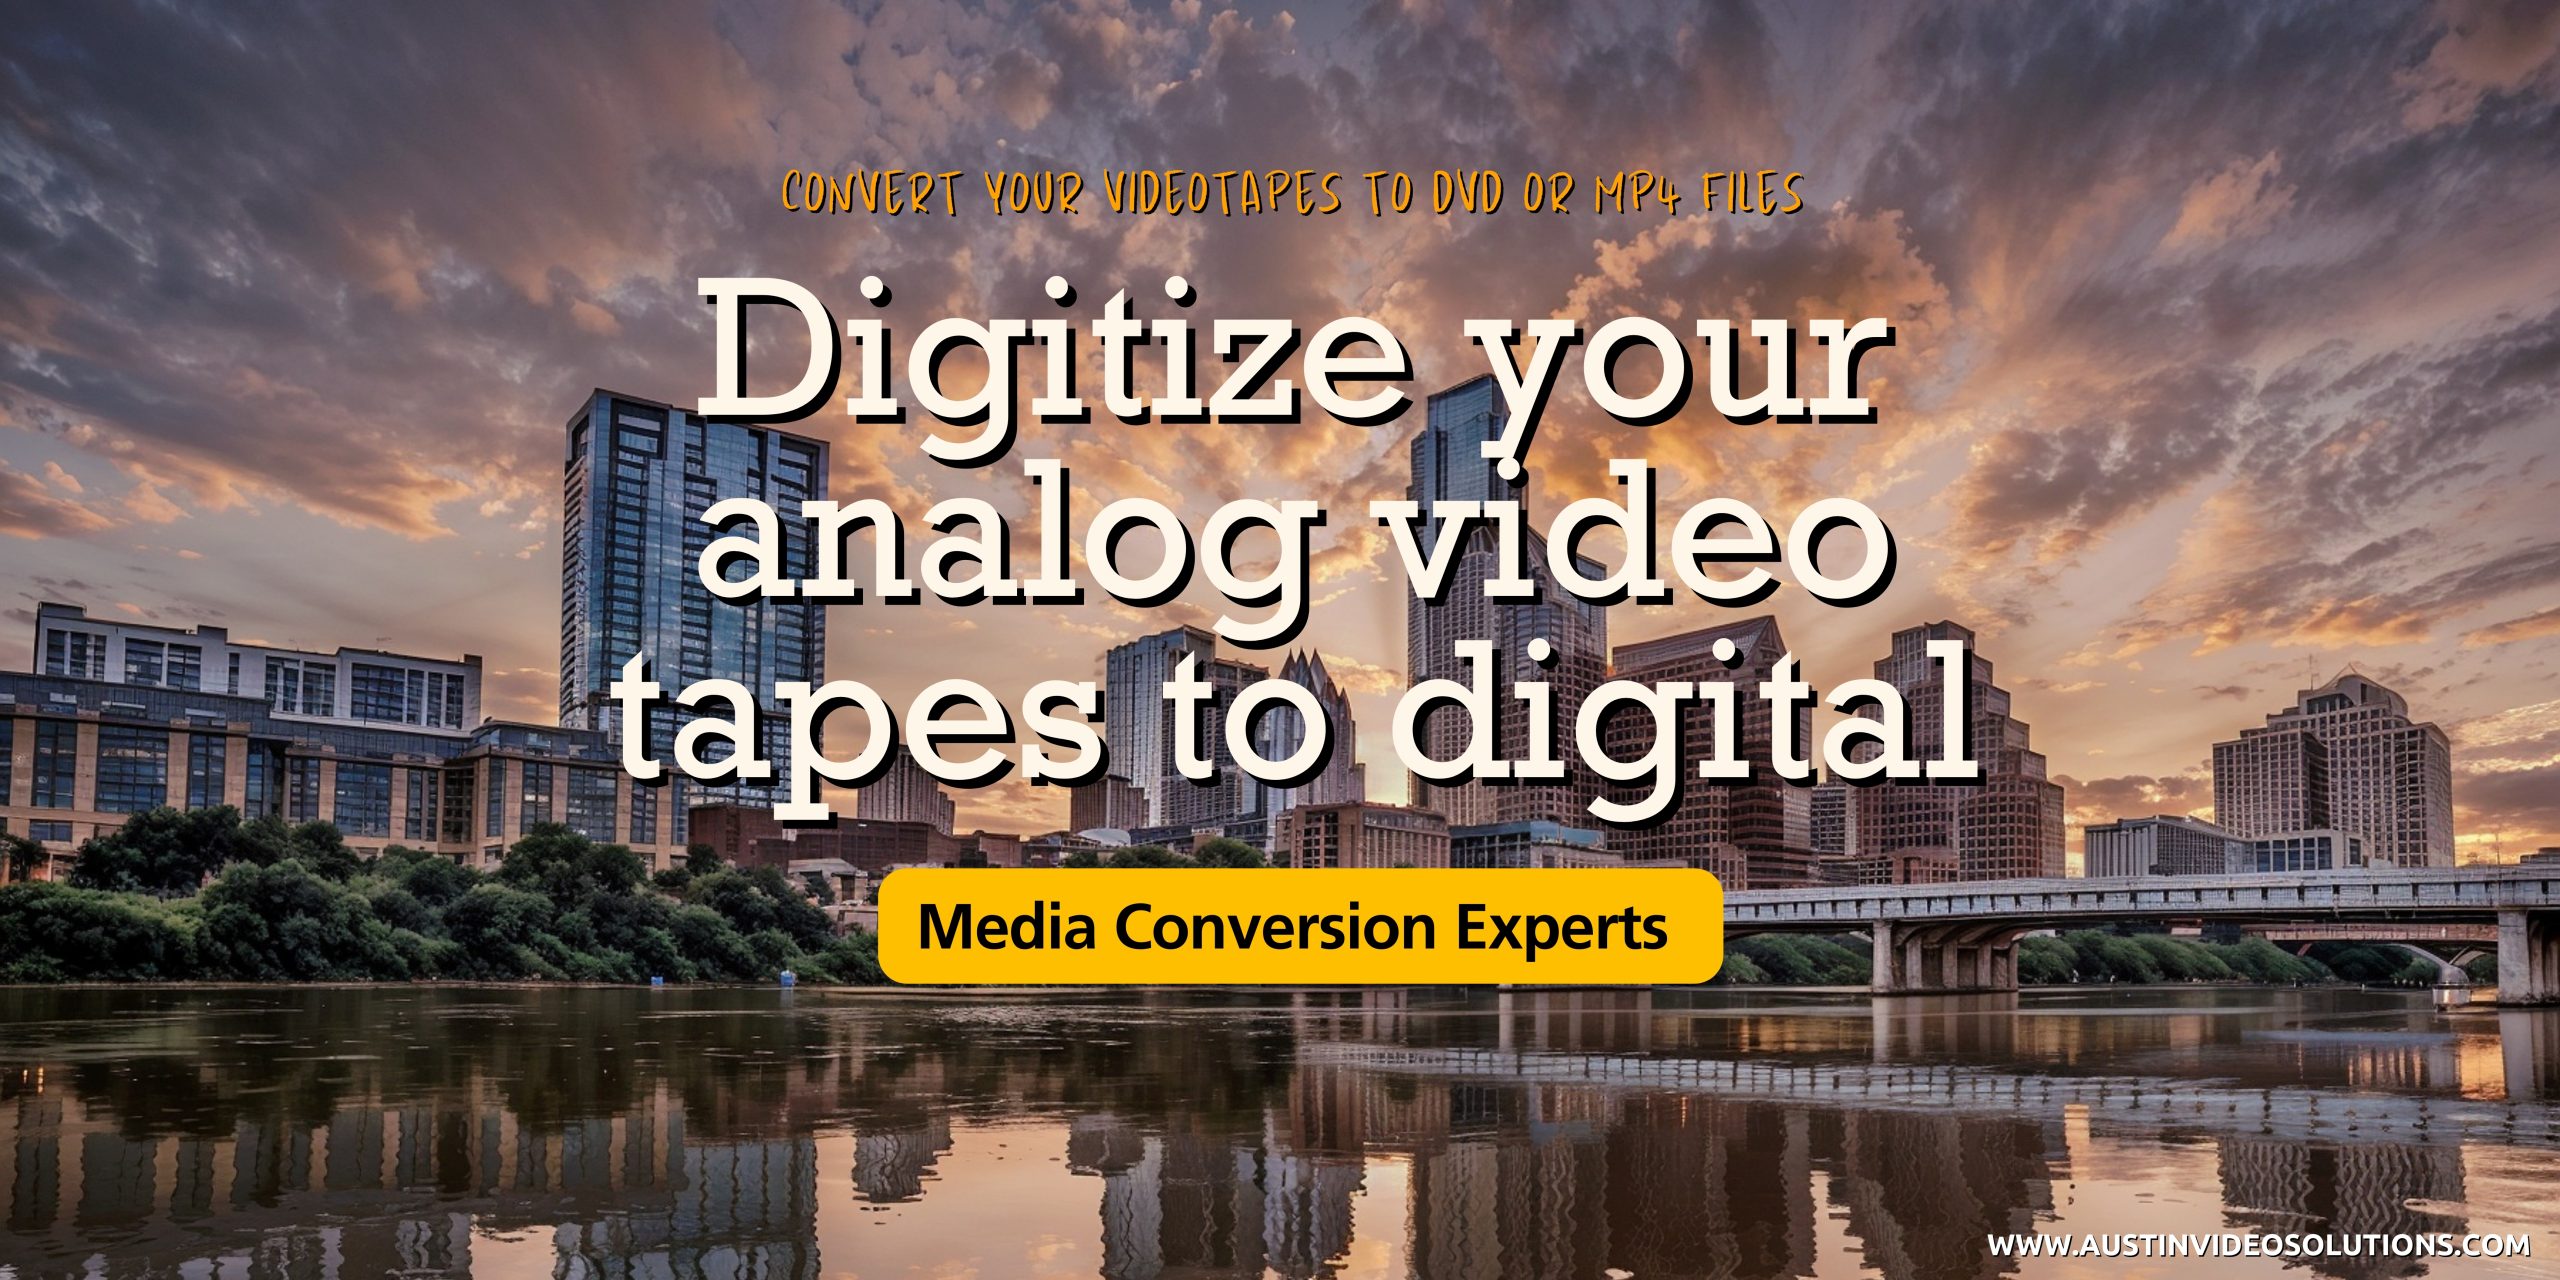 Future-Proof Your Home Video Tapes with Austin Video Solutions<br />
